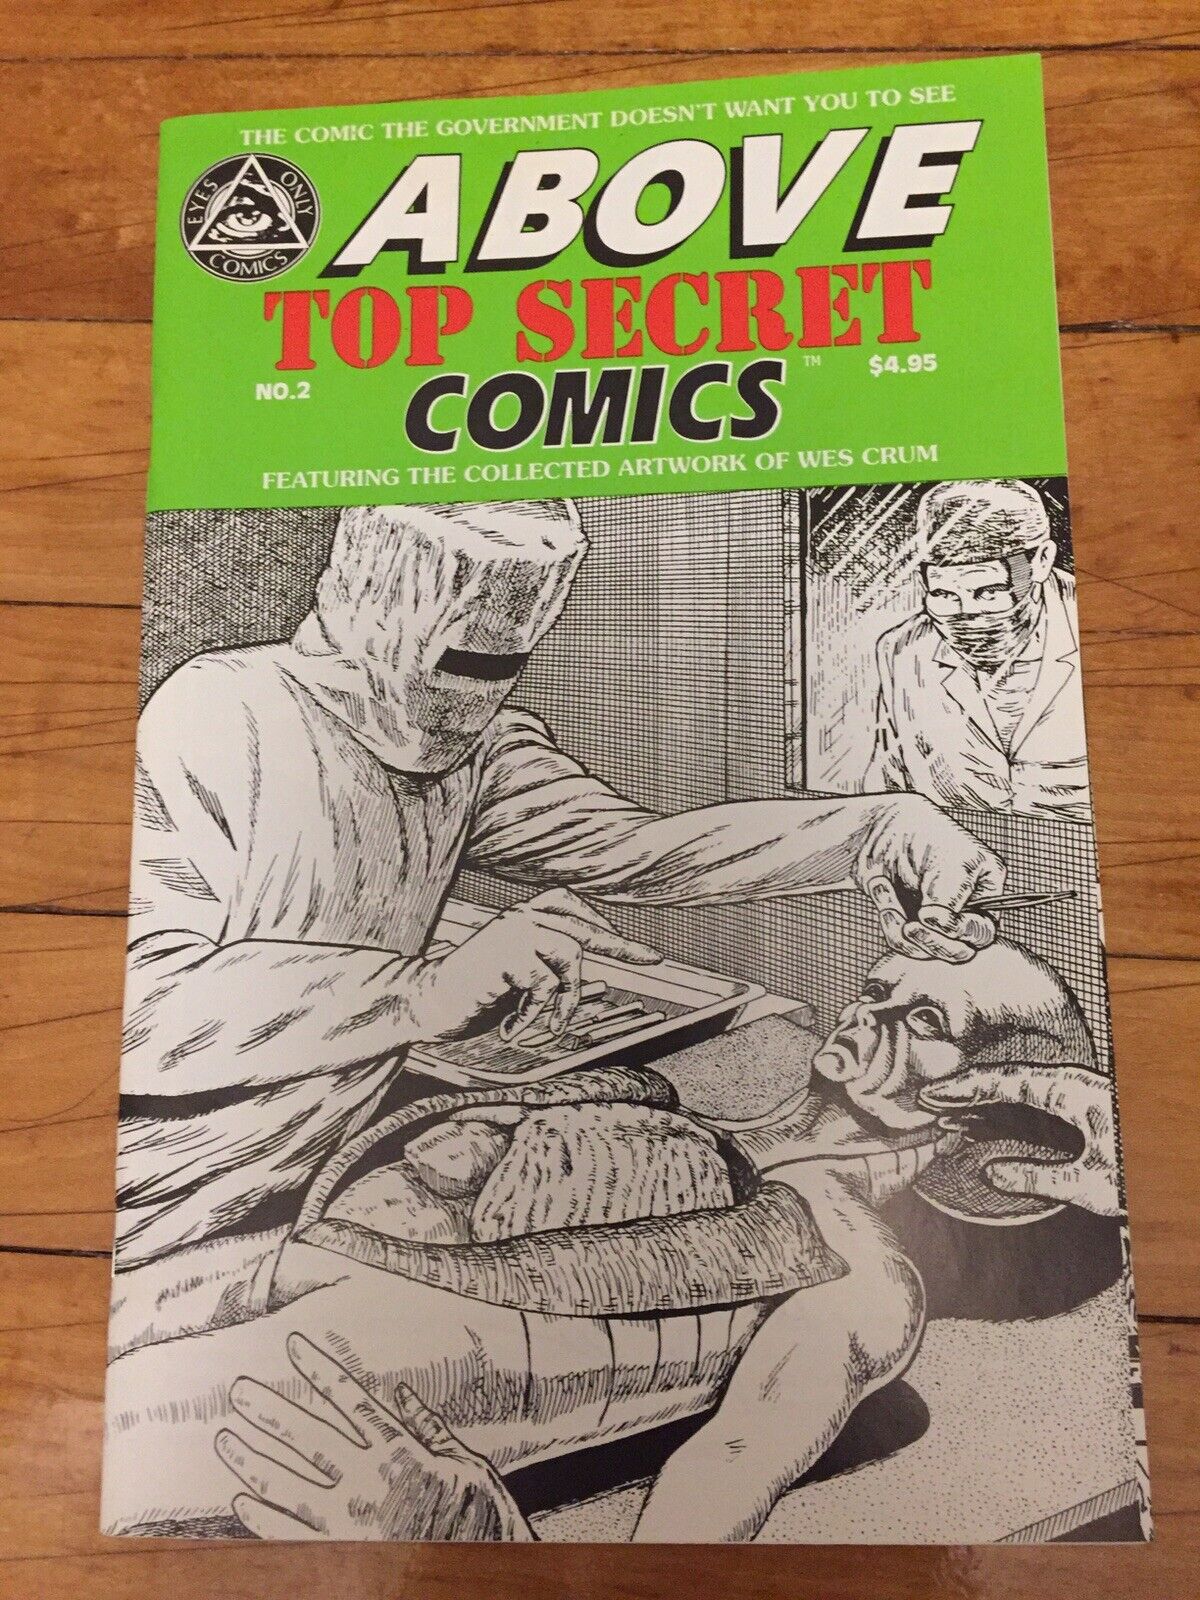 Above Top Secret Comics Featuring The Collected Artwork Of Wes Volume2 No.2 1996